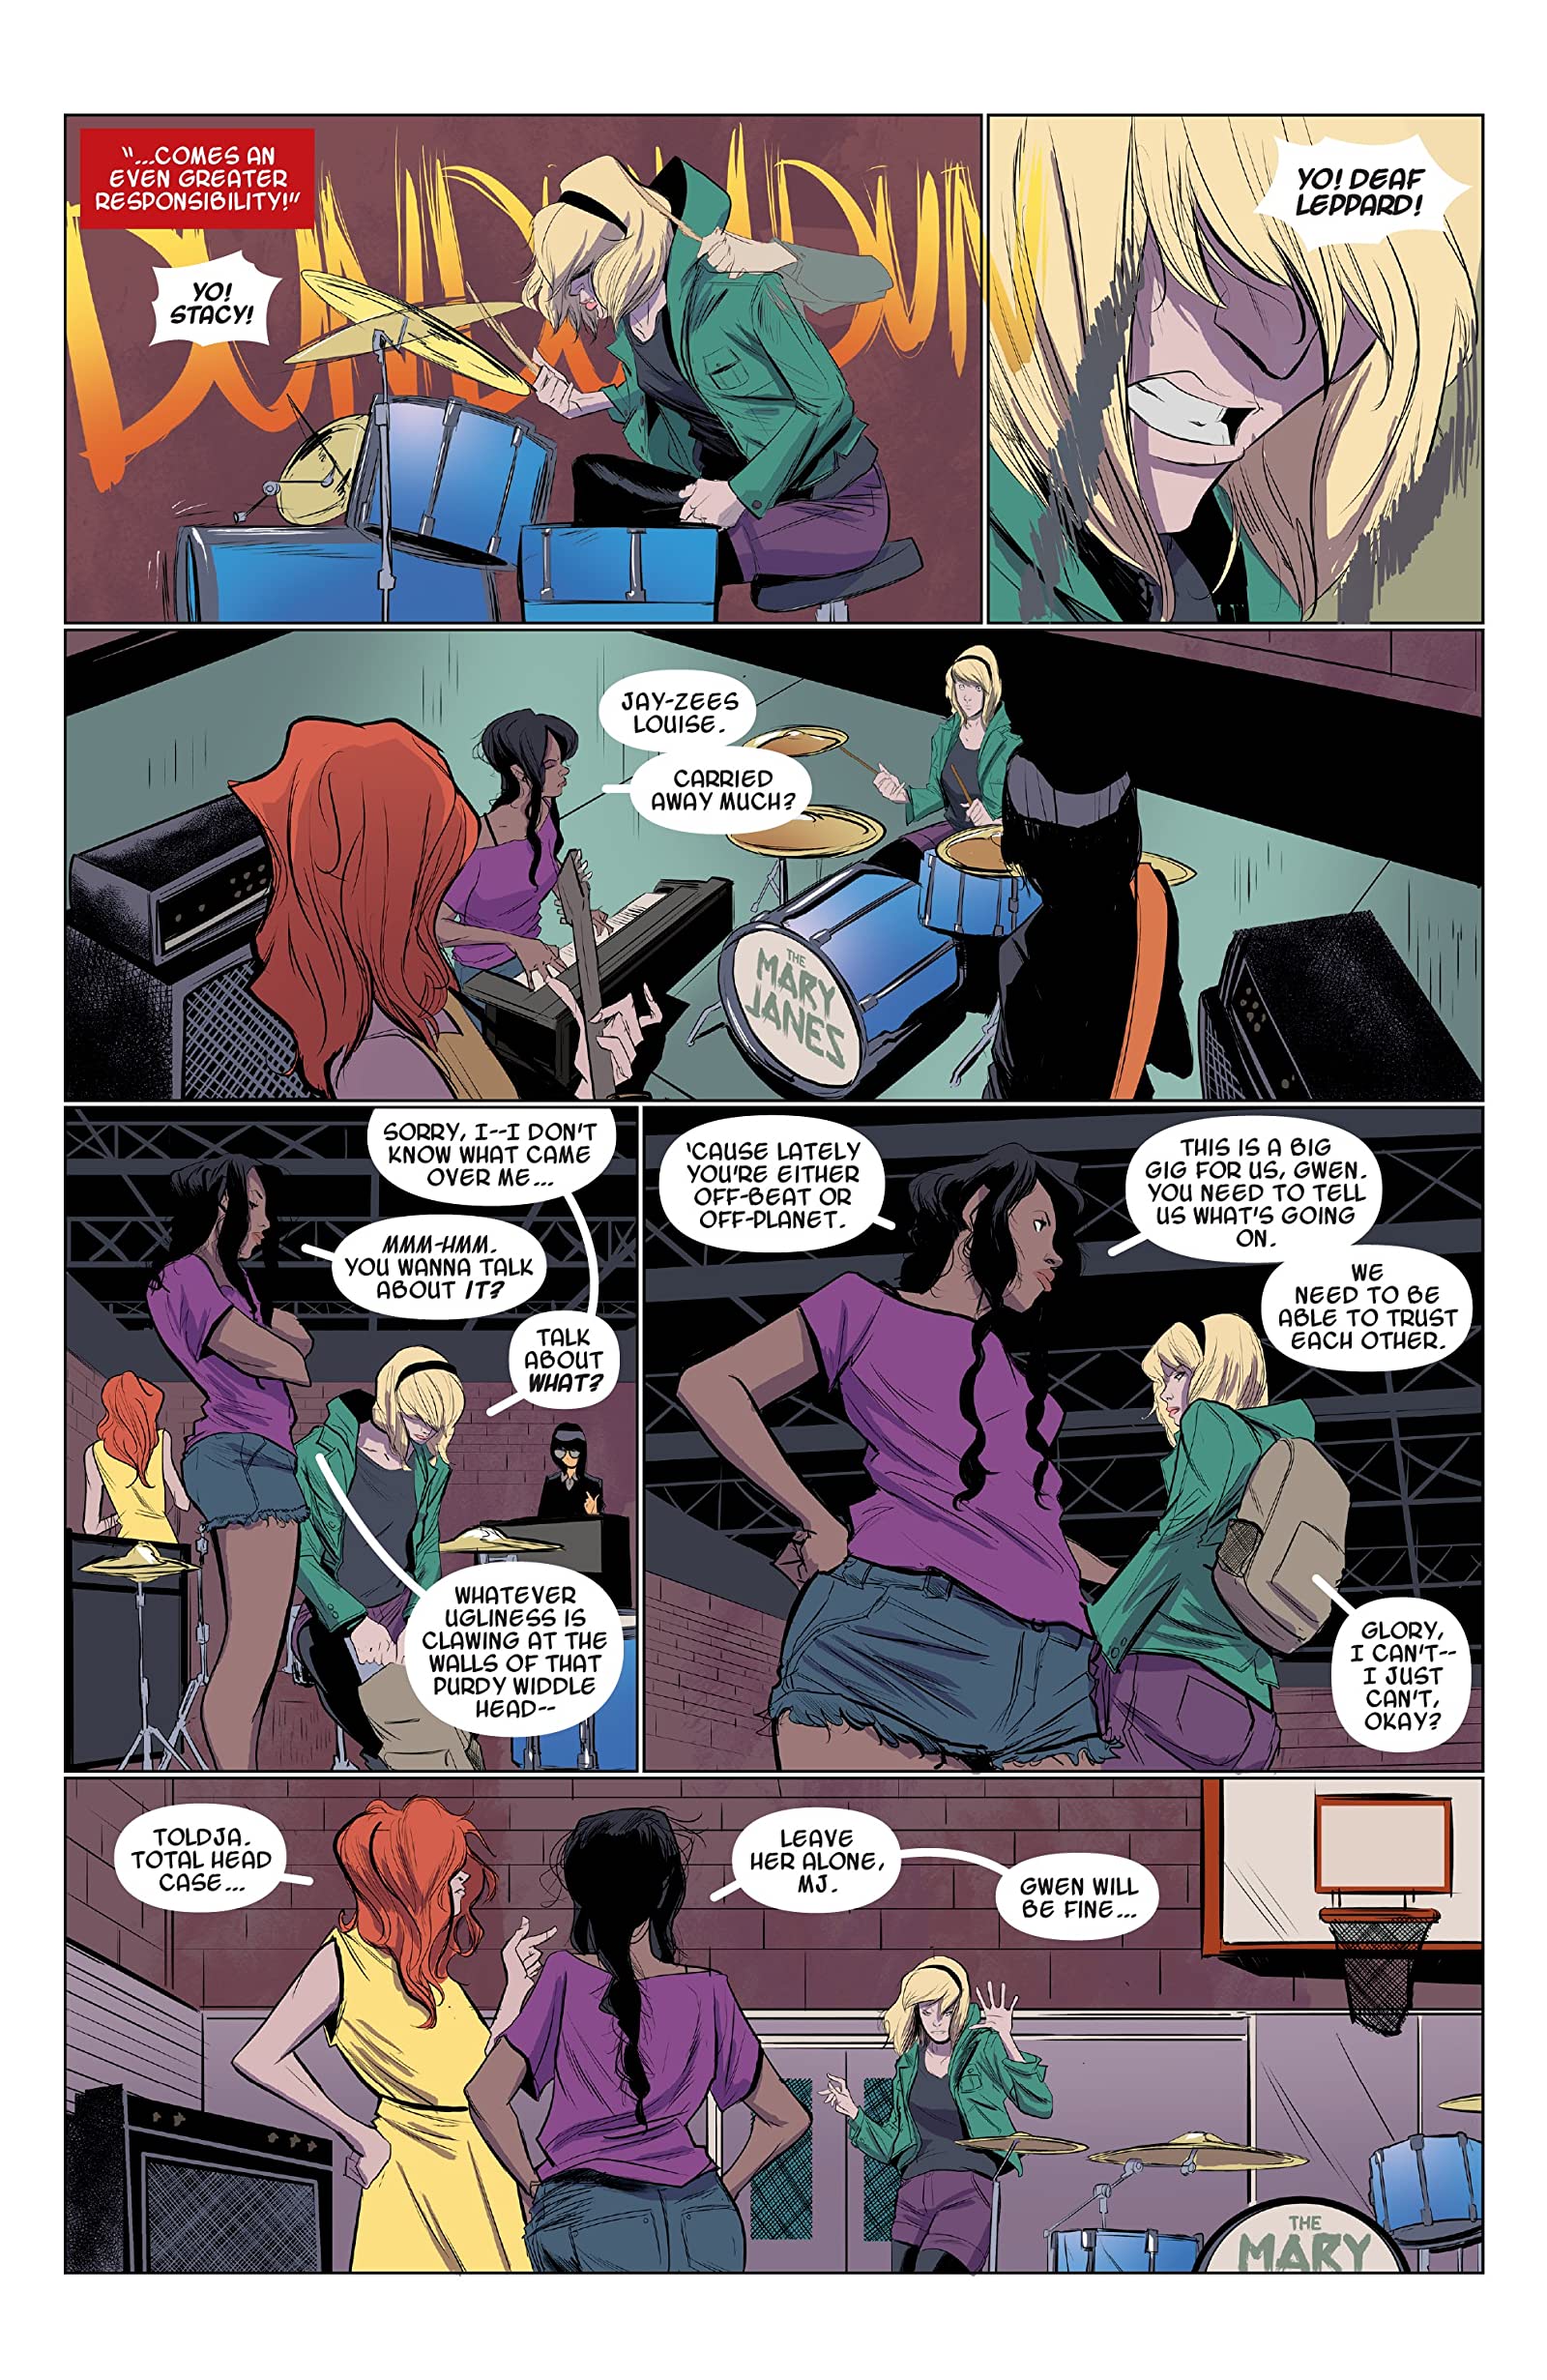 Rhino assaults Gwen's father at one of her concerts - Spider-Gwen: Vol. 0